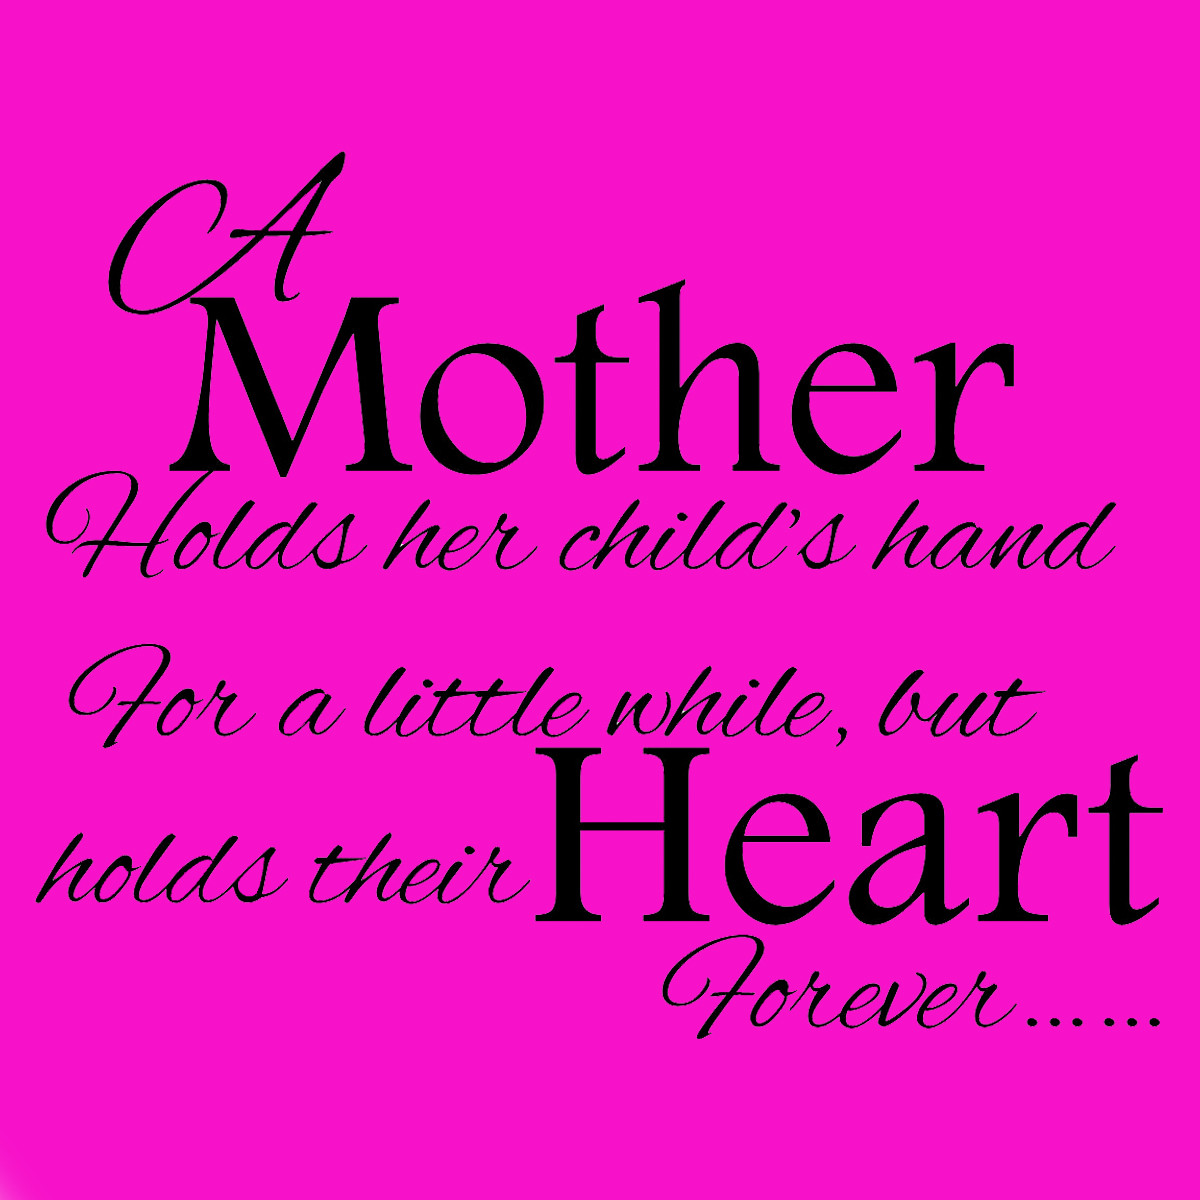 Quotes For Mothers
 Mothers Day Quotes For QuotesGram